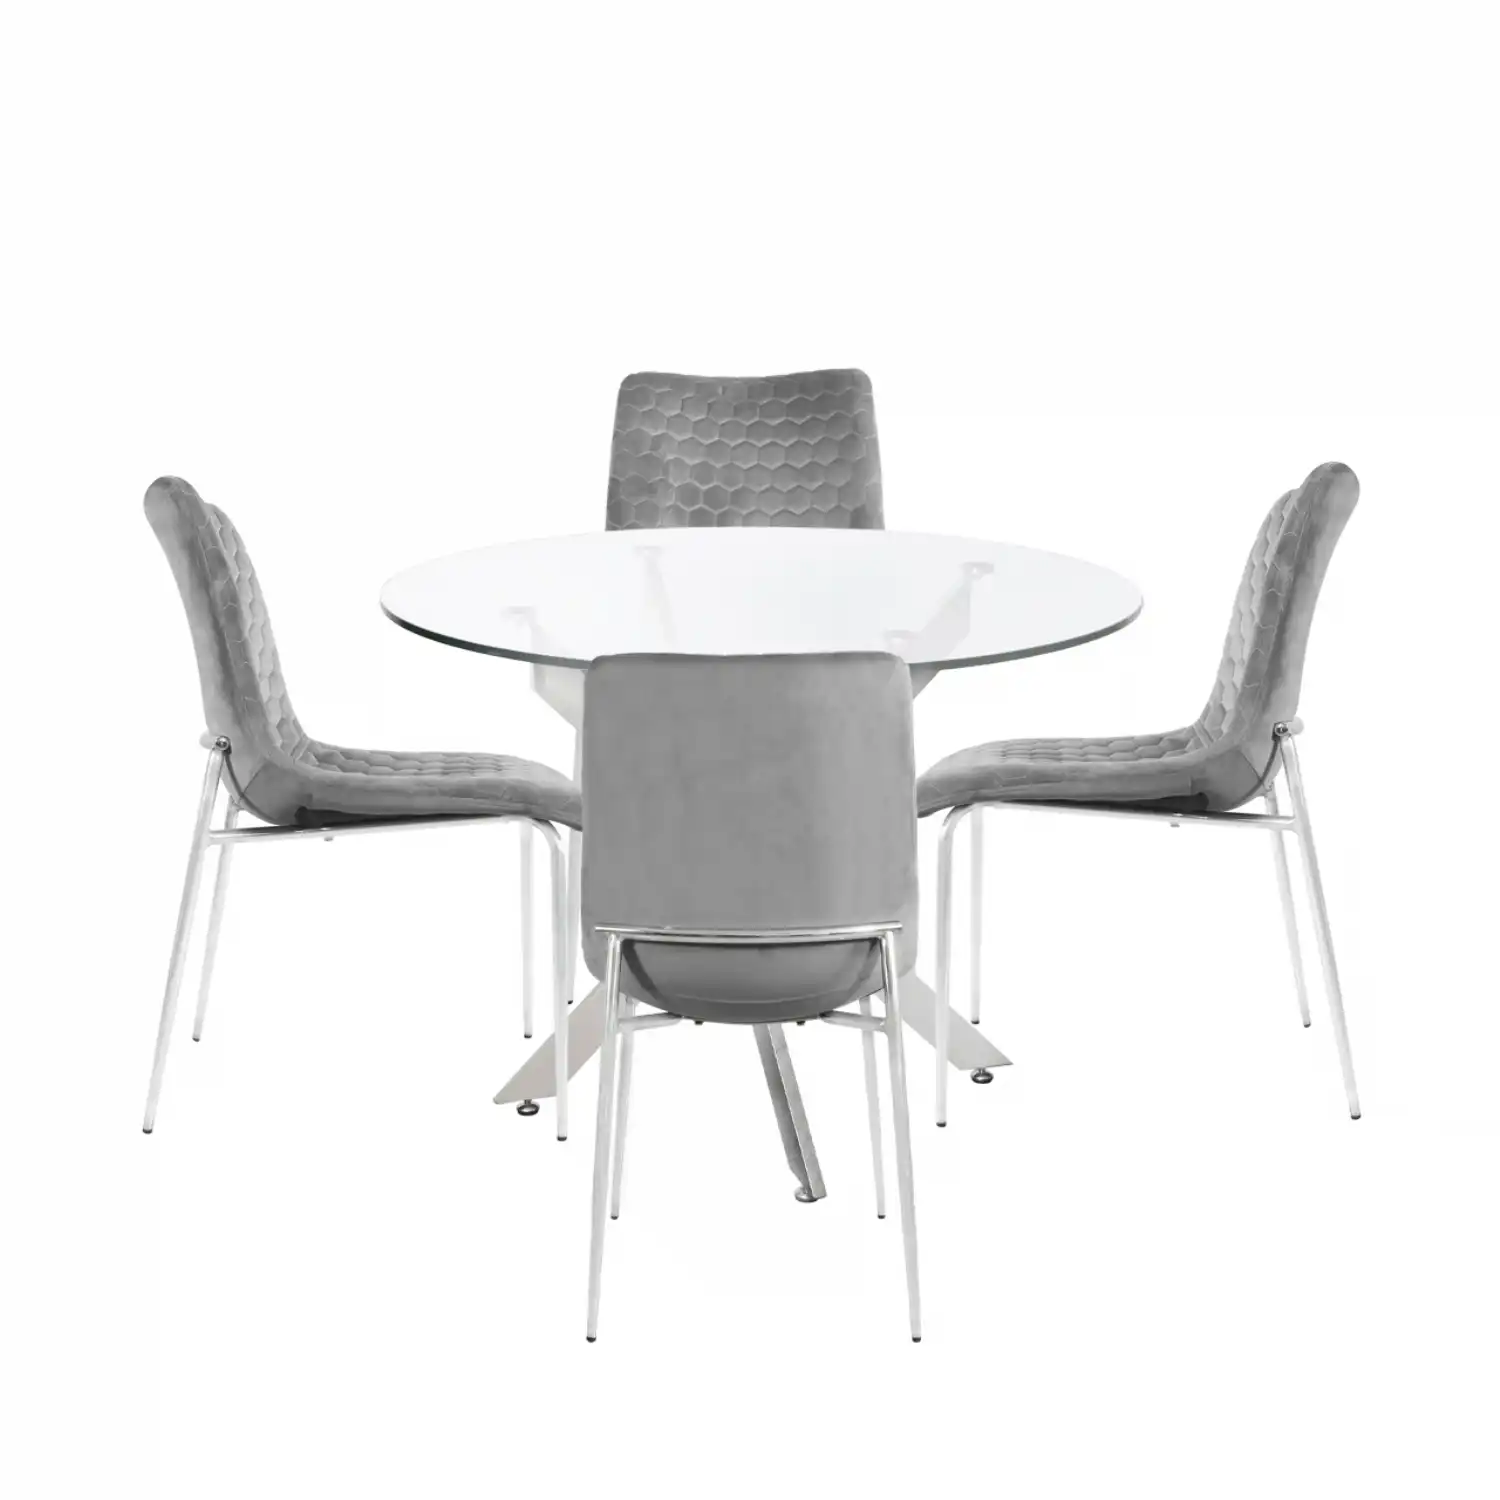 Nova 100cm Round Dining Table And 4 Grey Chairs